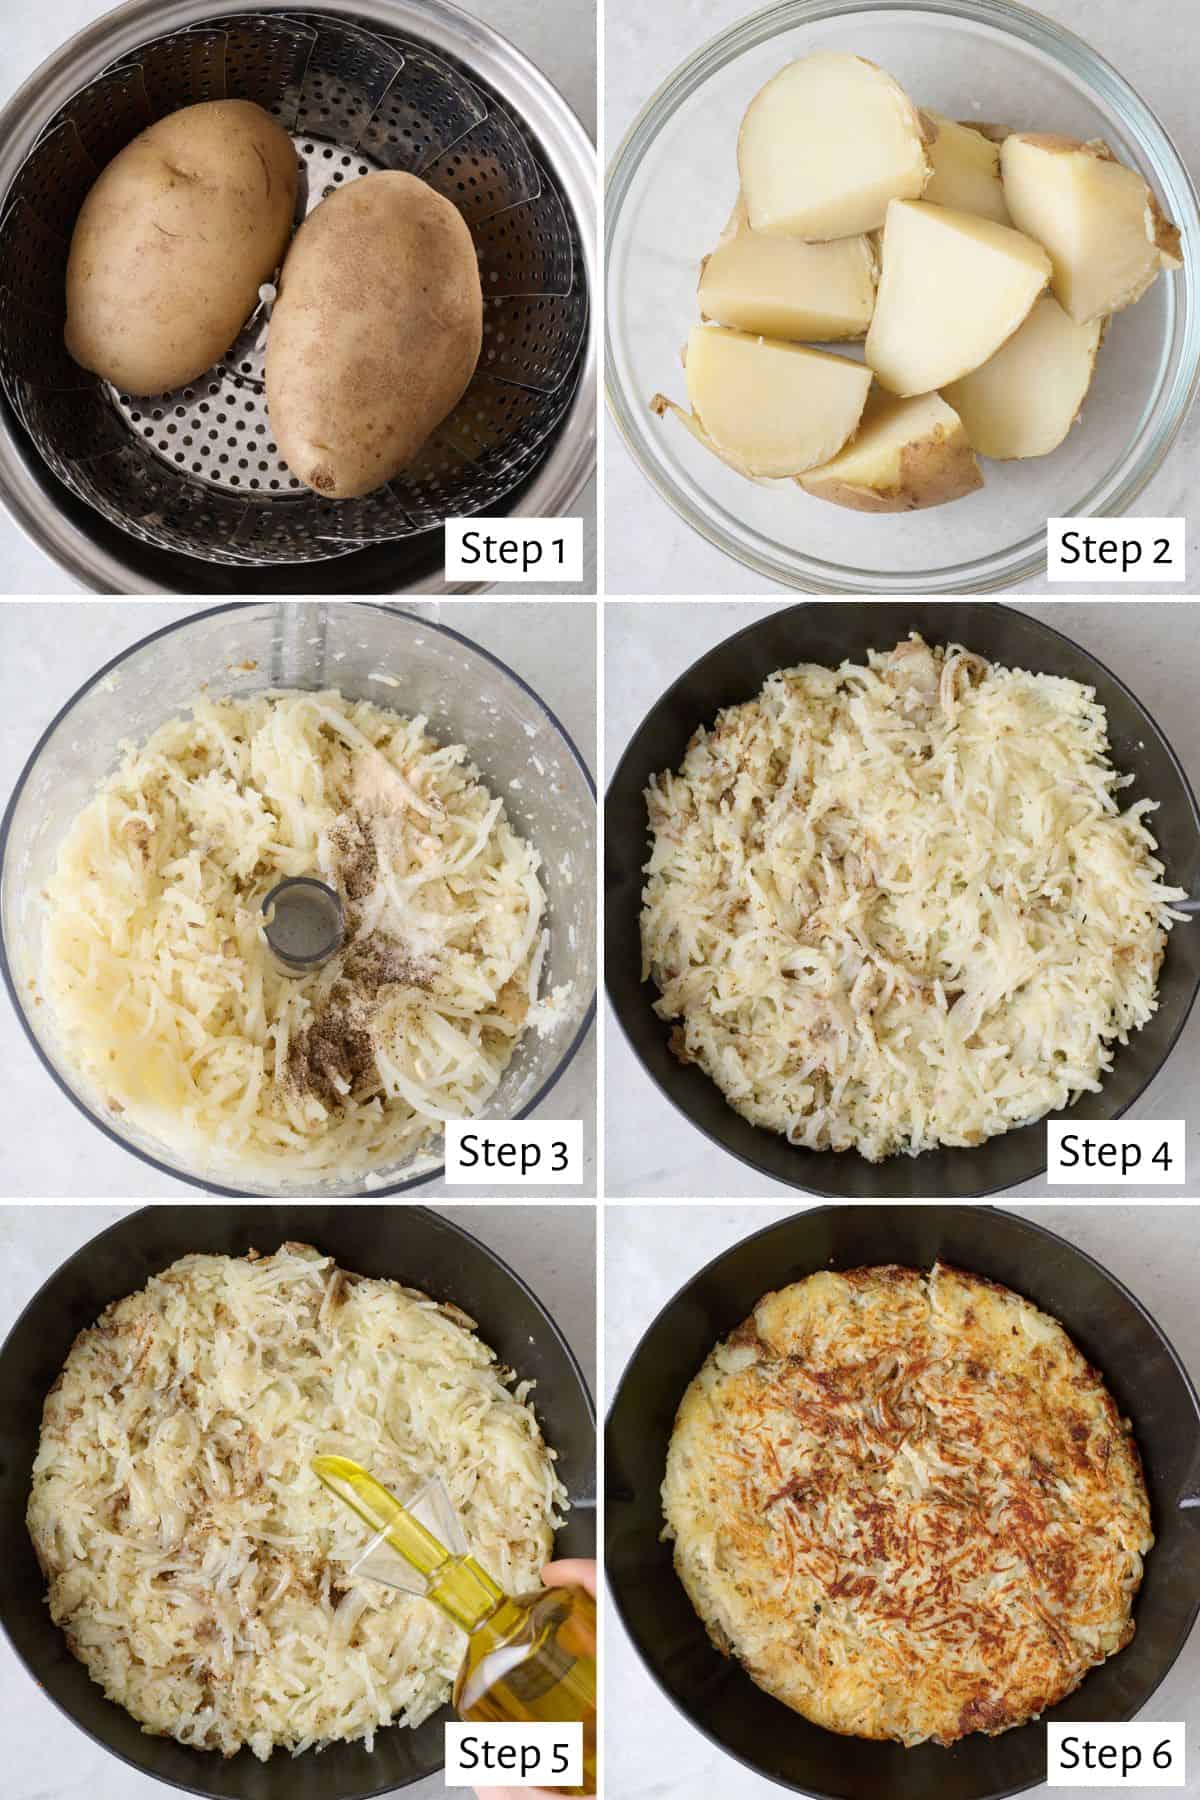 6-image collage cooking hash browns: 1 - Potatoes in a steamer basket over a pot of water; 2 - Potatoes cut into quarters after steaming; 3 - Quartered potatoes after processing through the shredding attachment in the bowl of processor with salt, pepper, and onion powder sprinkled on top; 4 - Shredded potatoes in a single layer on oiled pan; 5 - Drizzling extra oil on top after bottom begins to brown; 6 - Browned, crispy potatoes after being flipped.